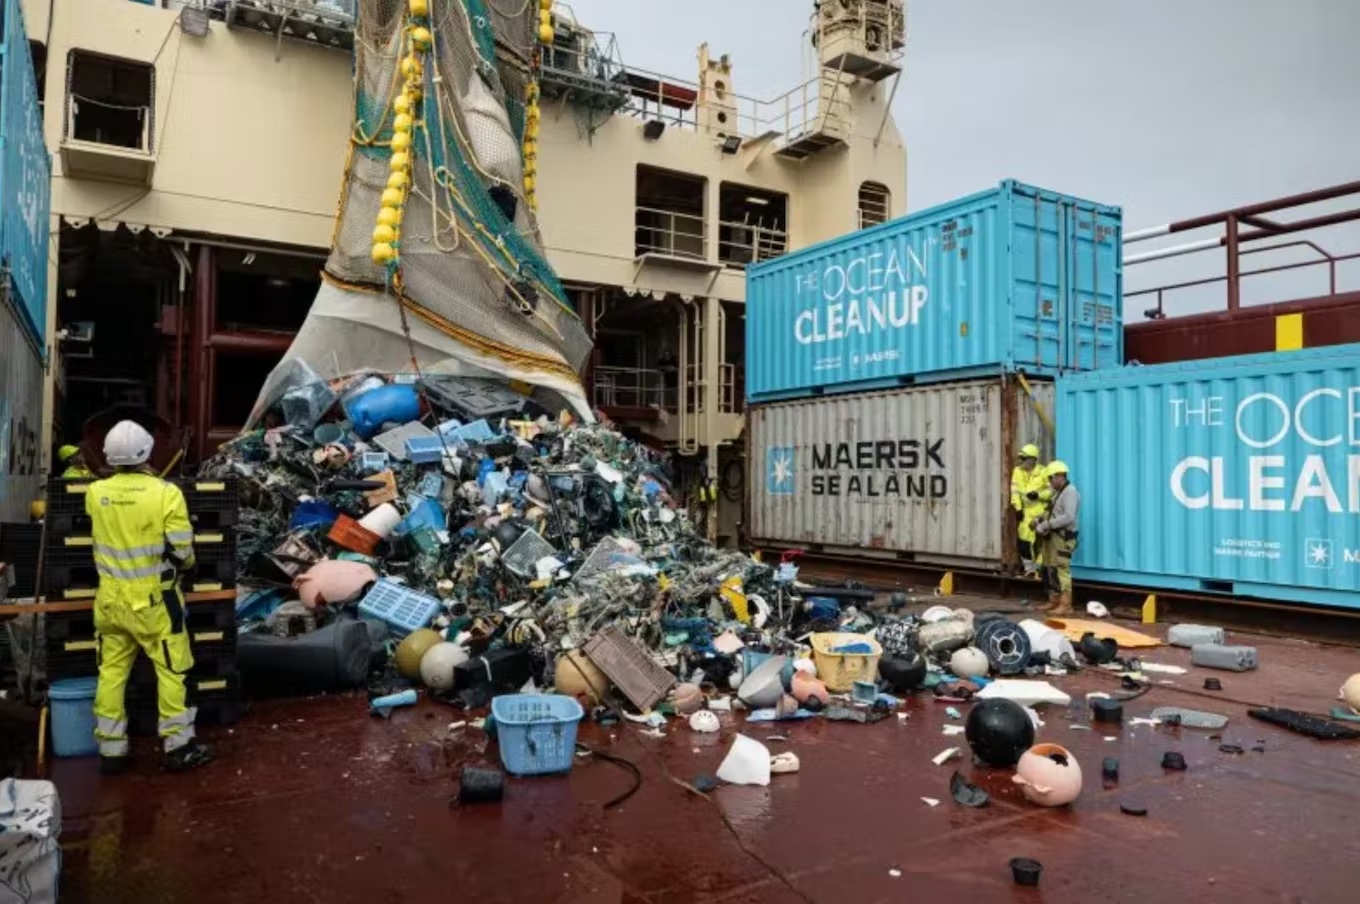 the ocean cleanup greenwashing